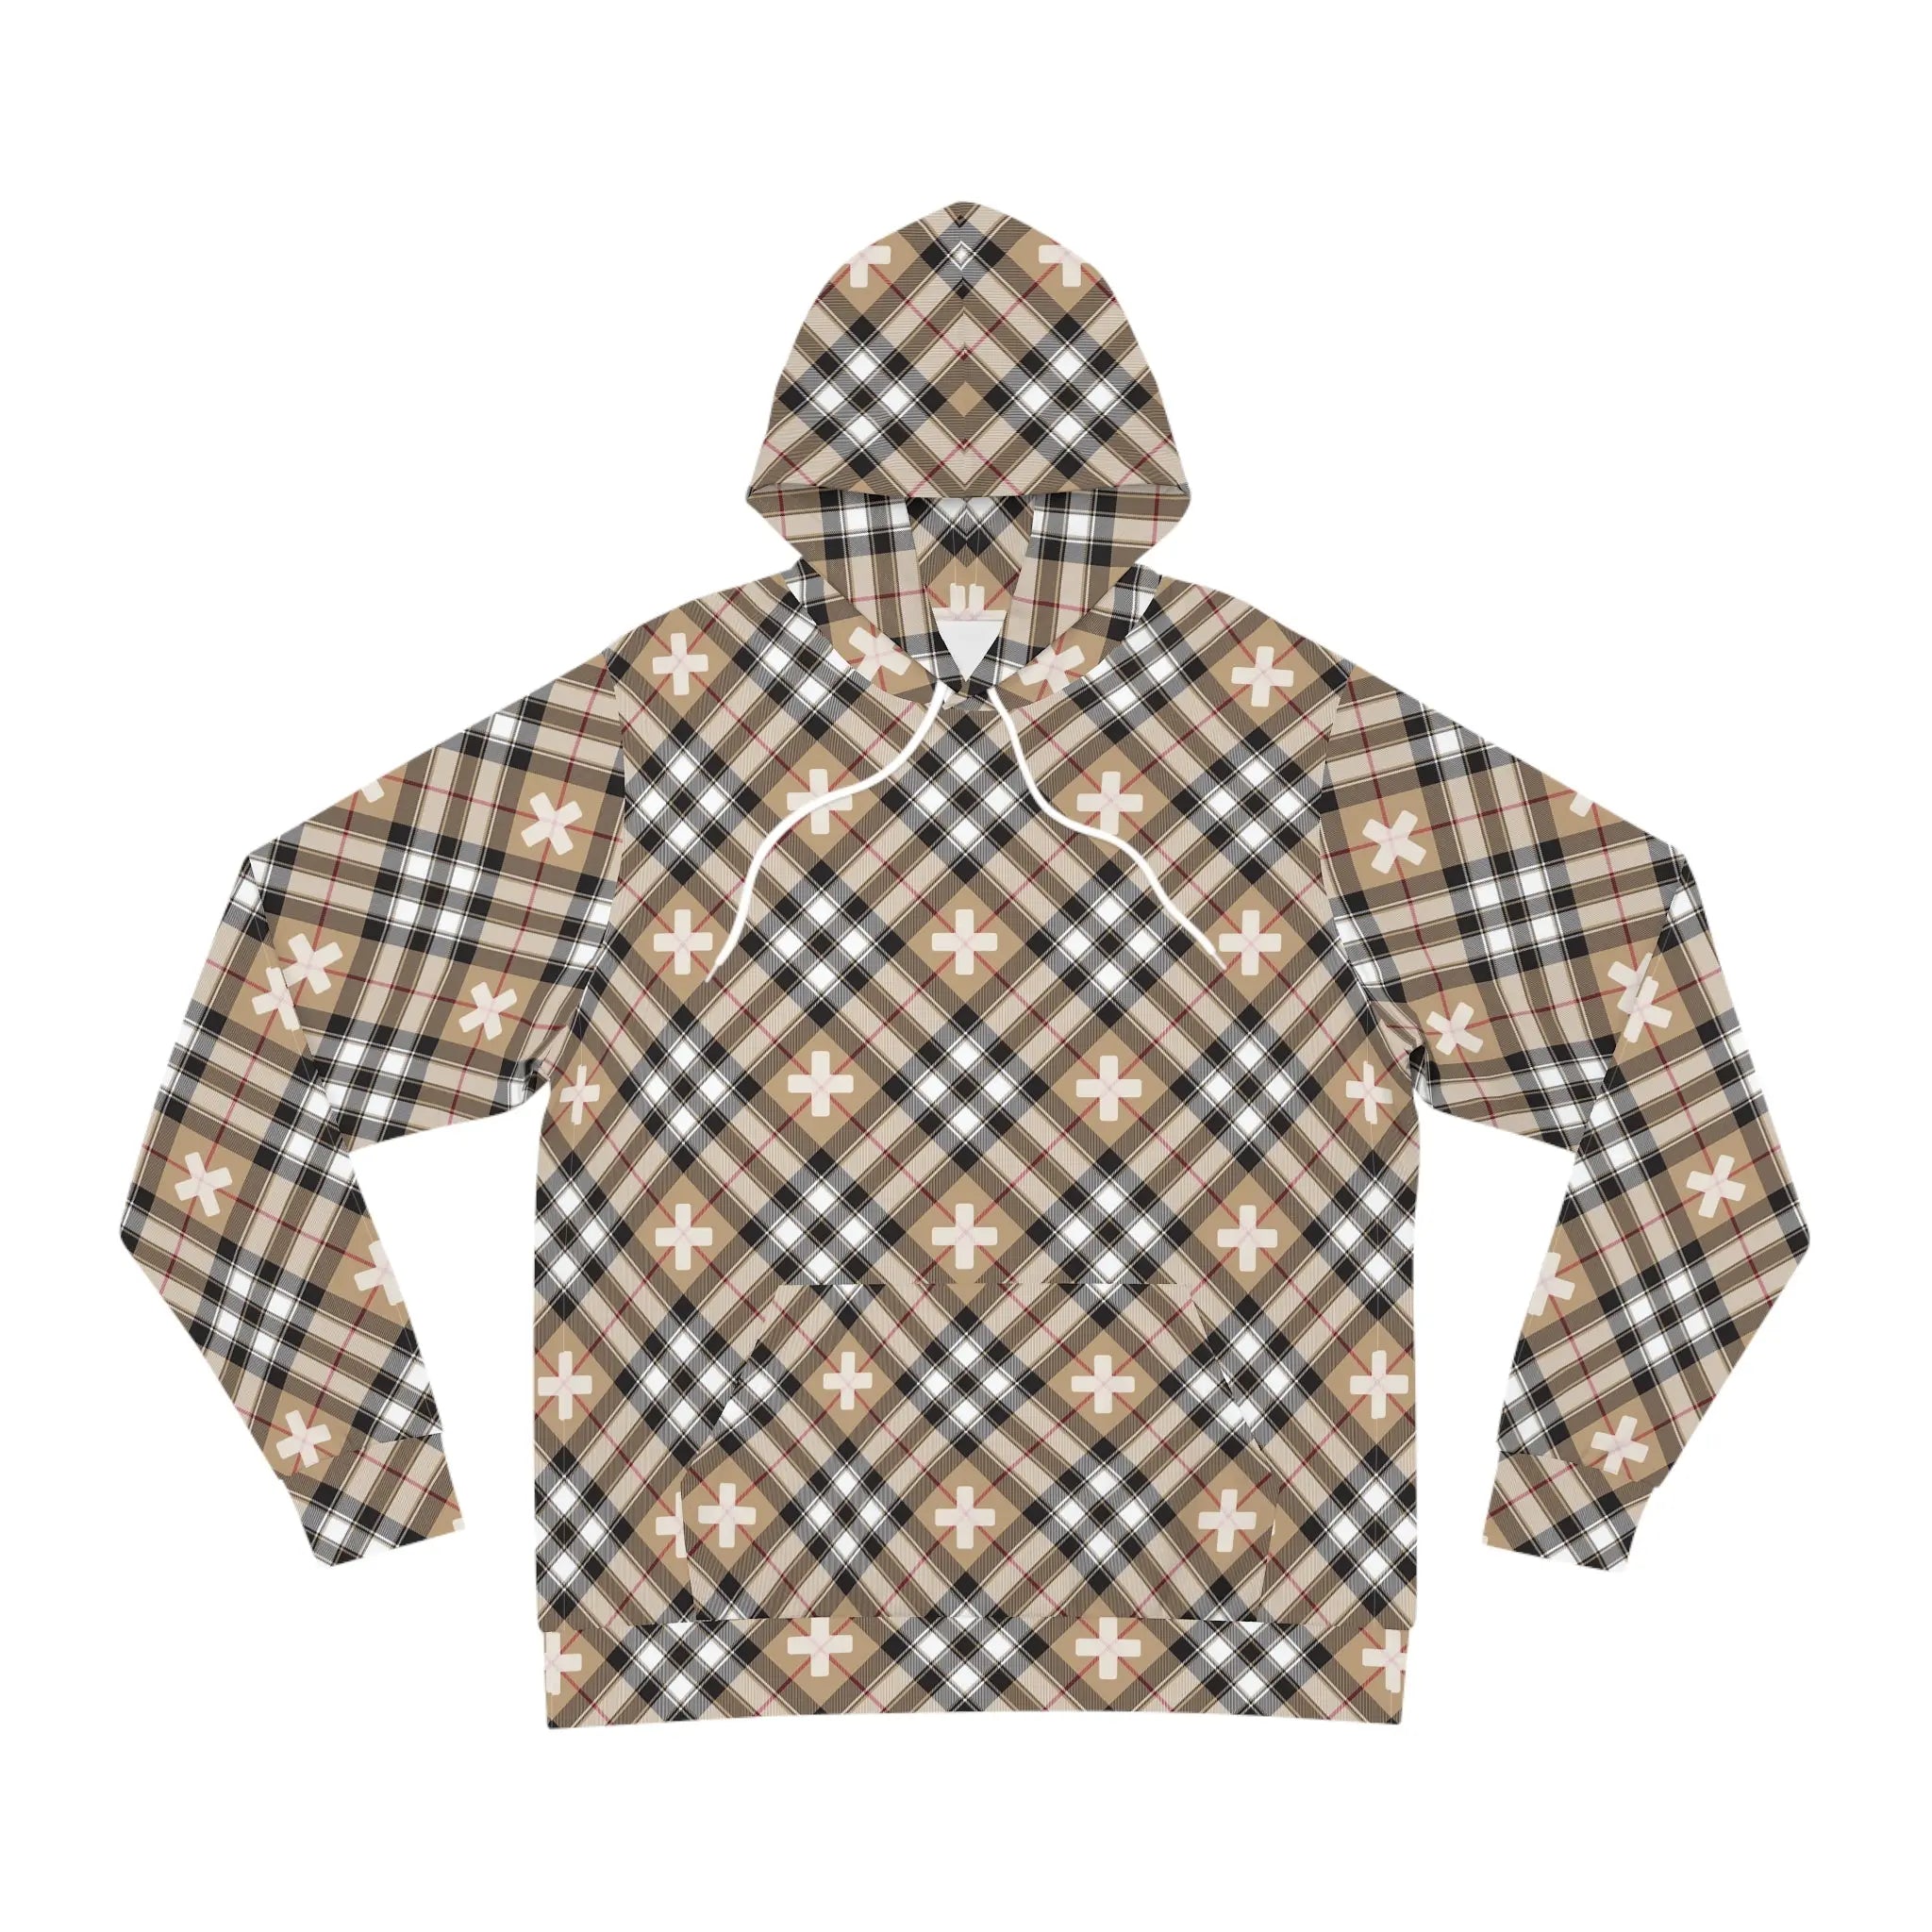  Beige Plaid Plus Signs Unisex Fashion Hoodie, Hooded Sweater, Streetwear Hooded Sweatshirt All Over PrintsSSeamthreadcolorautomaticallymatchedtodesign